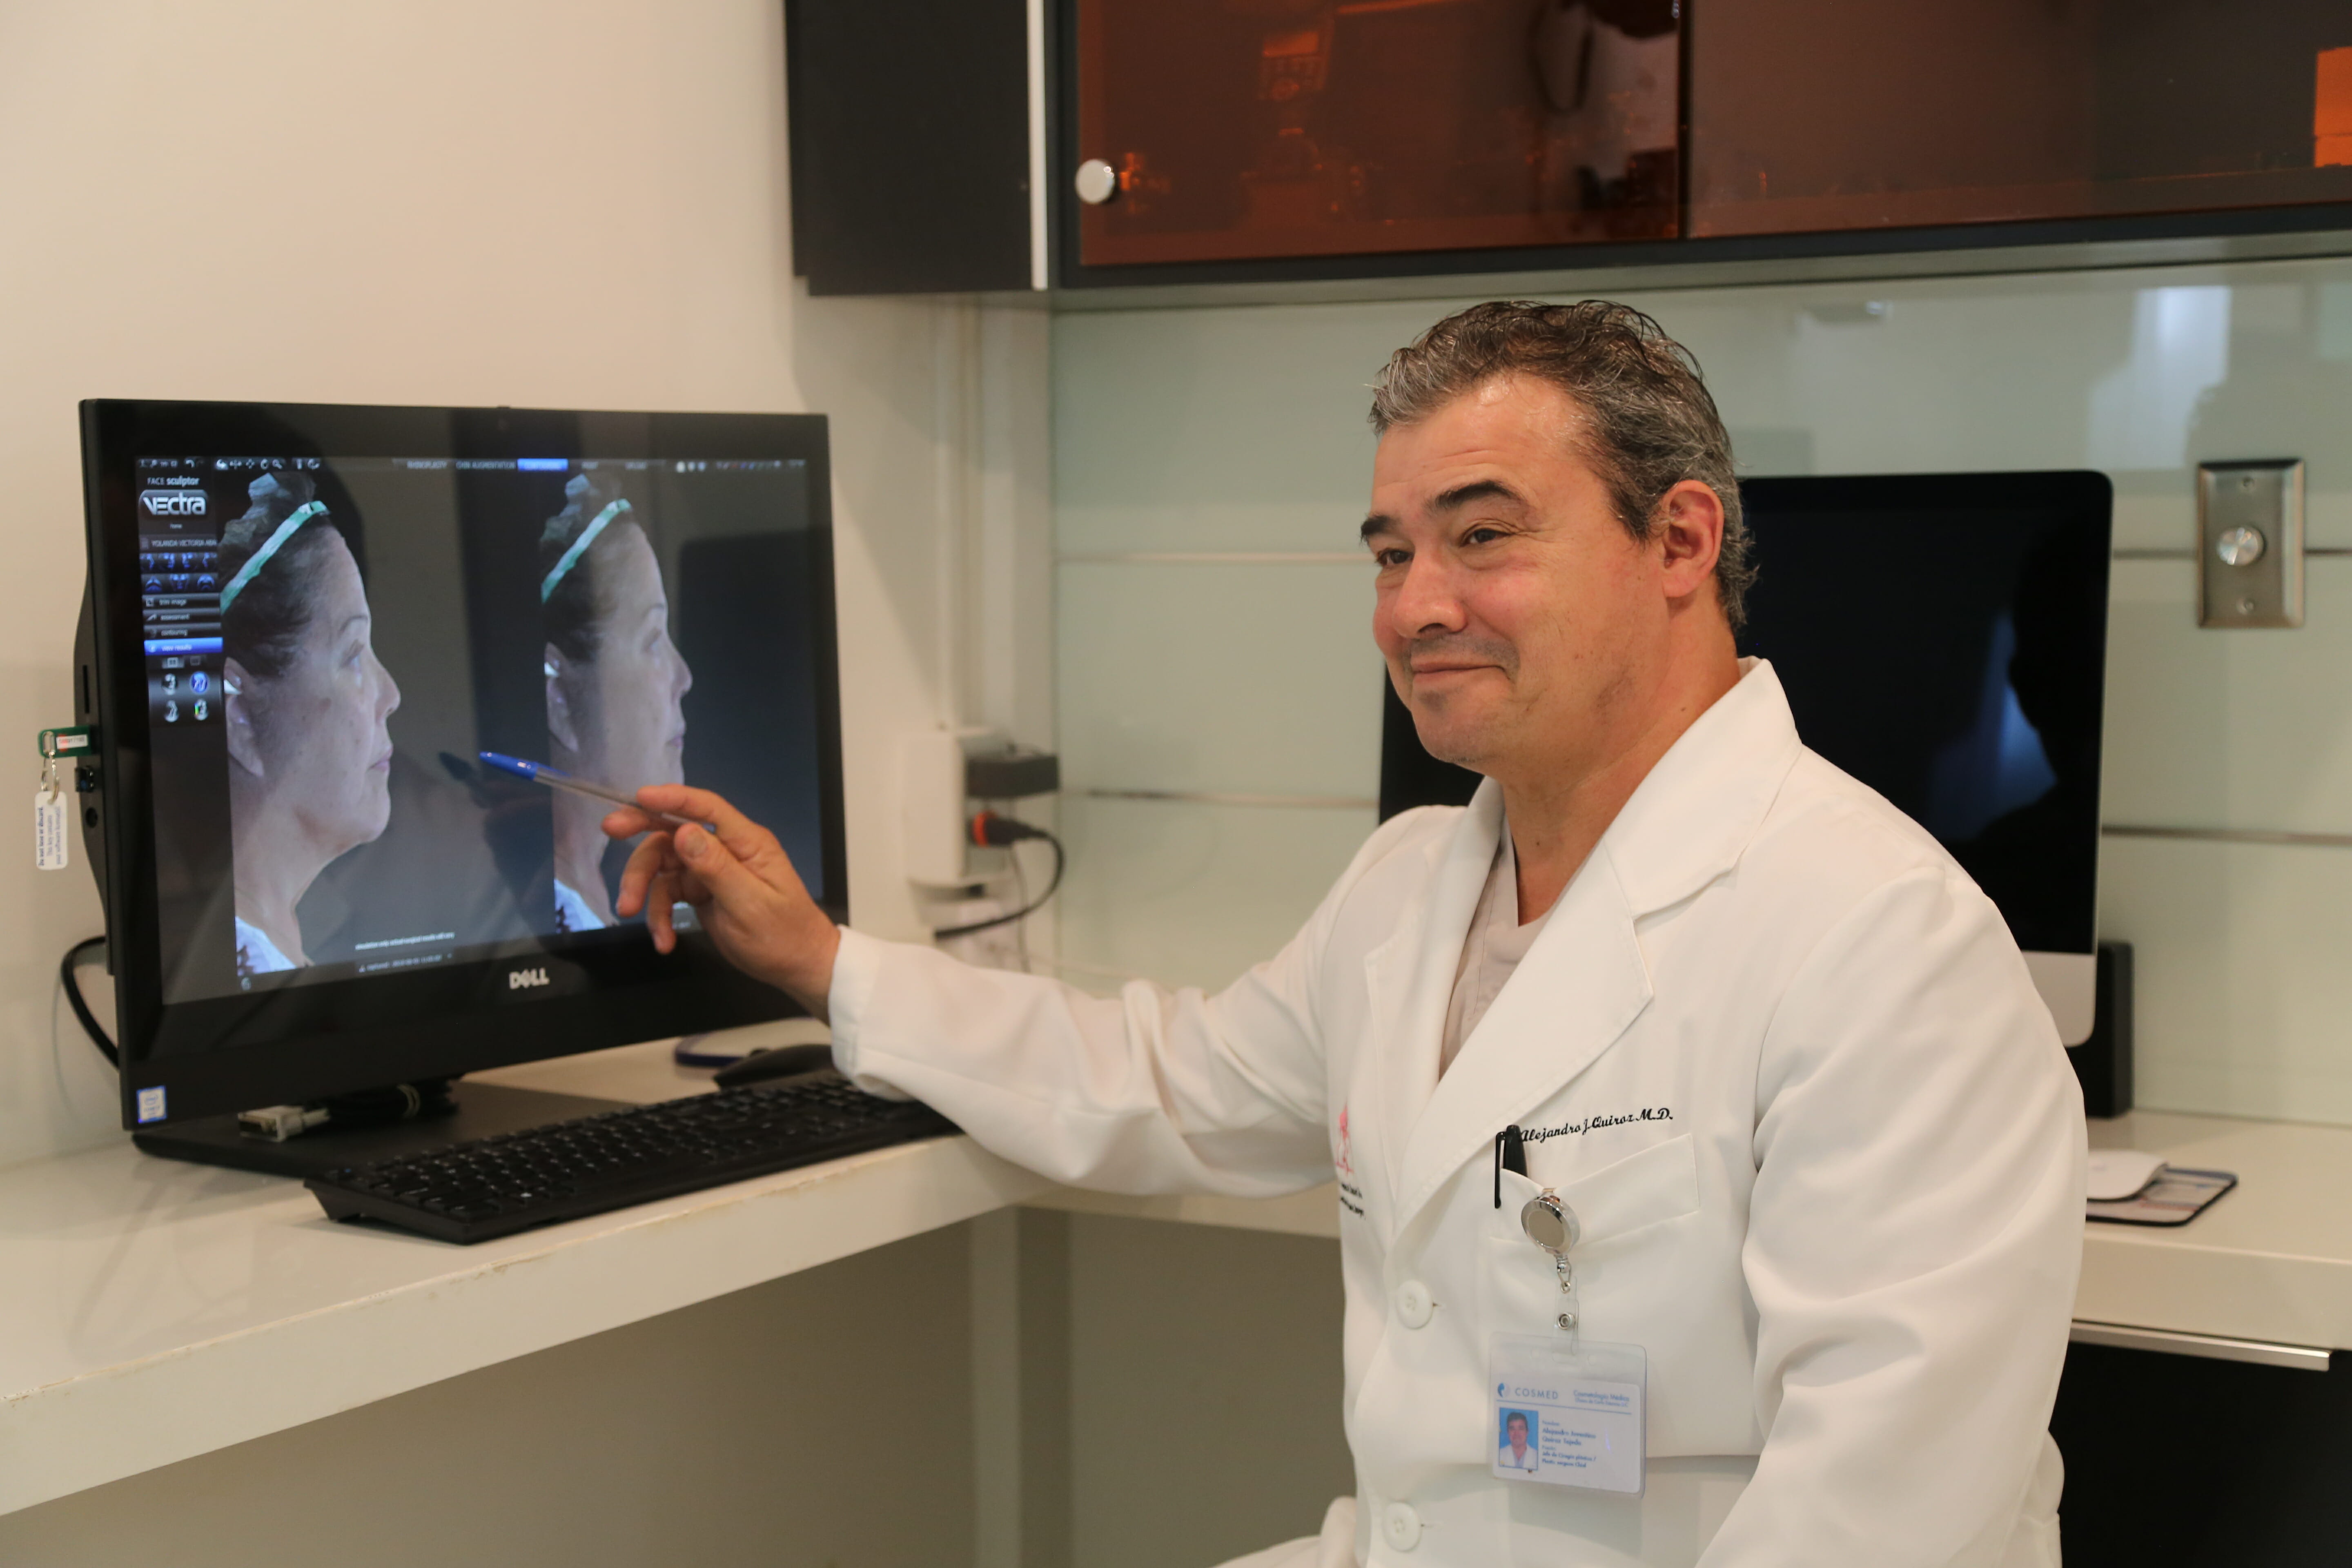 Dr. Quiroz using Vectra for a facelift surgery 